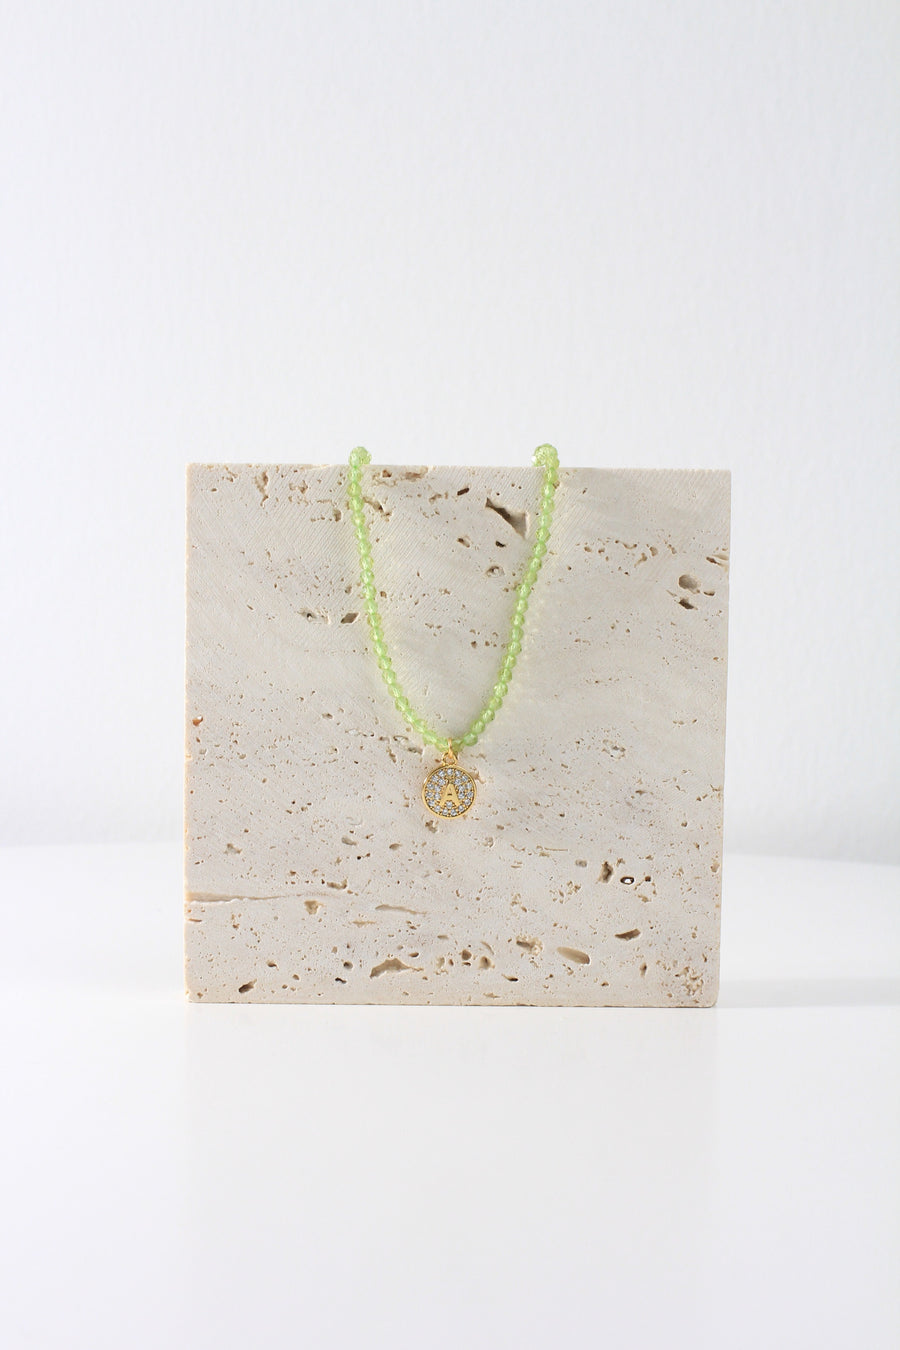 Verdant Dreams Peridot Personalised Necklace- Round Initial